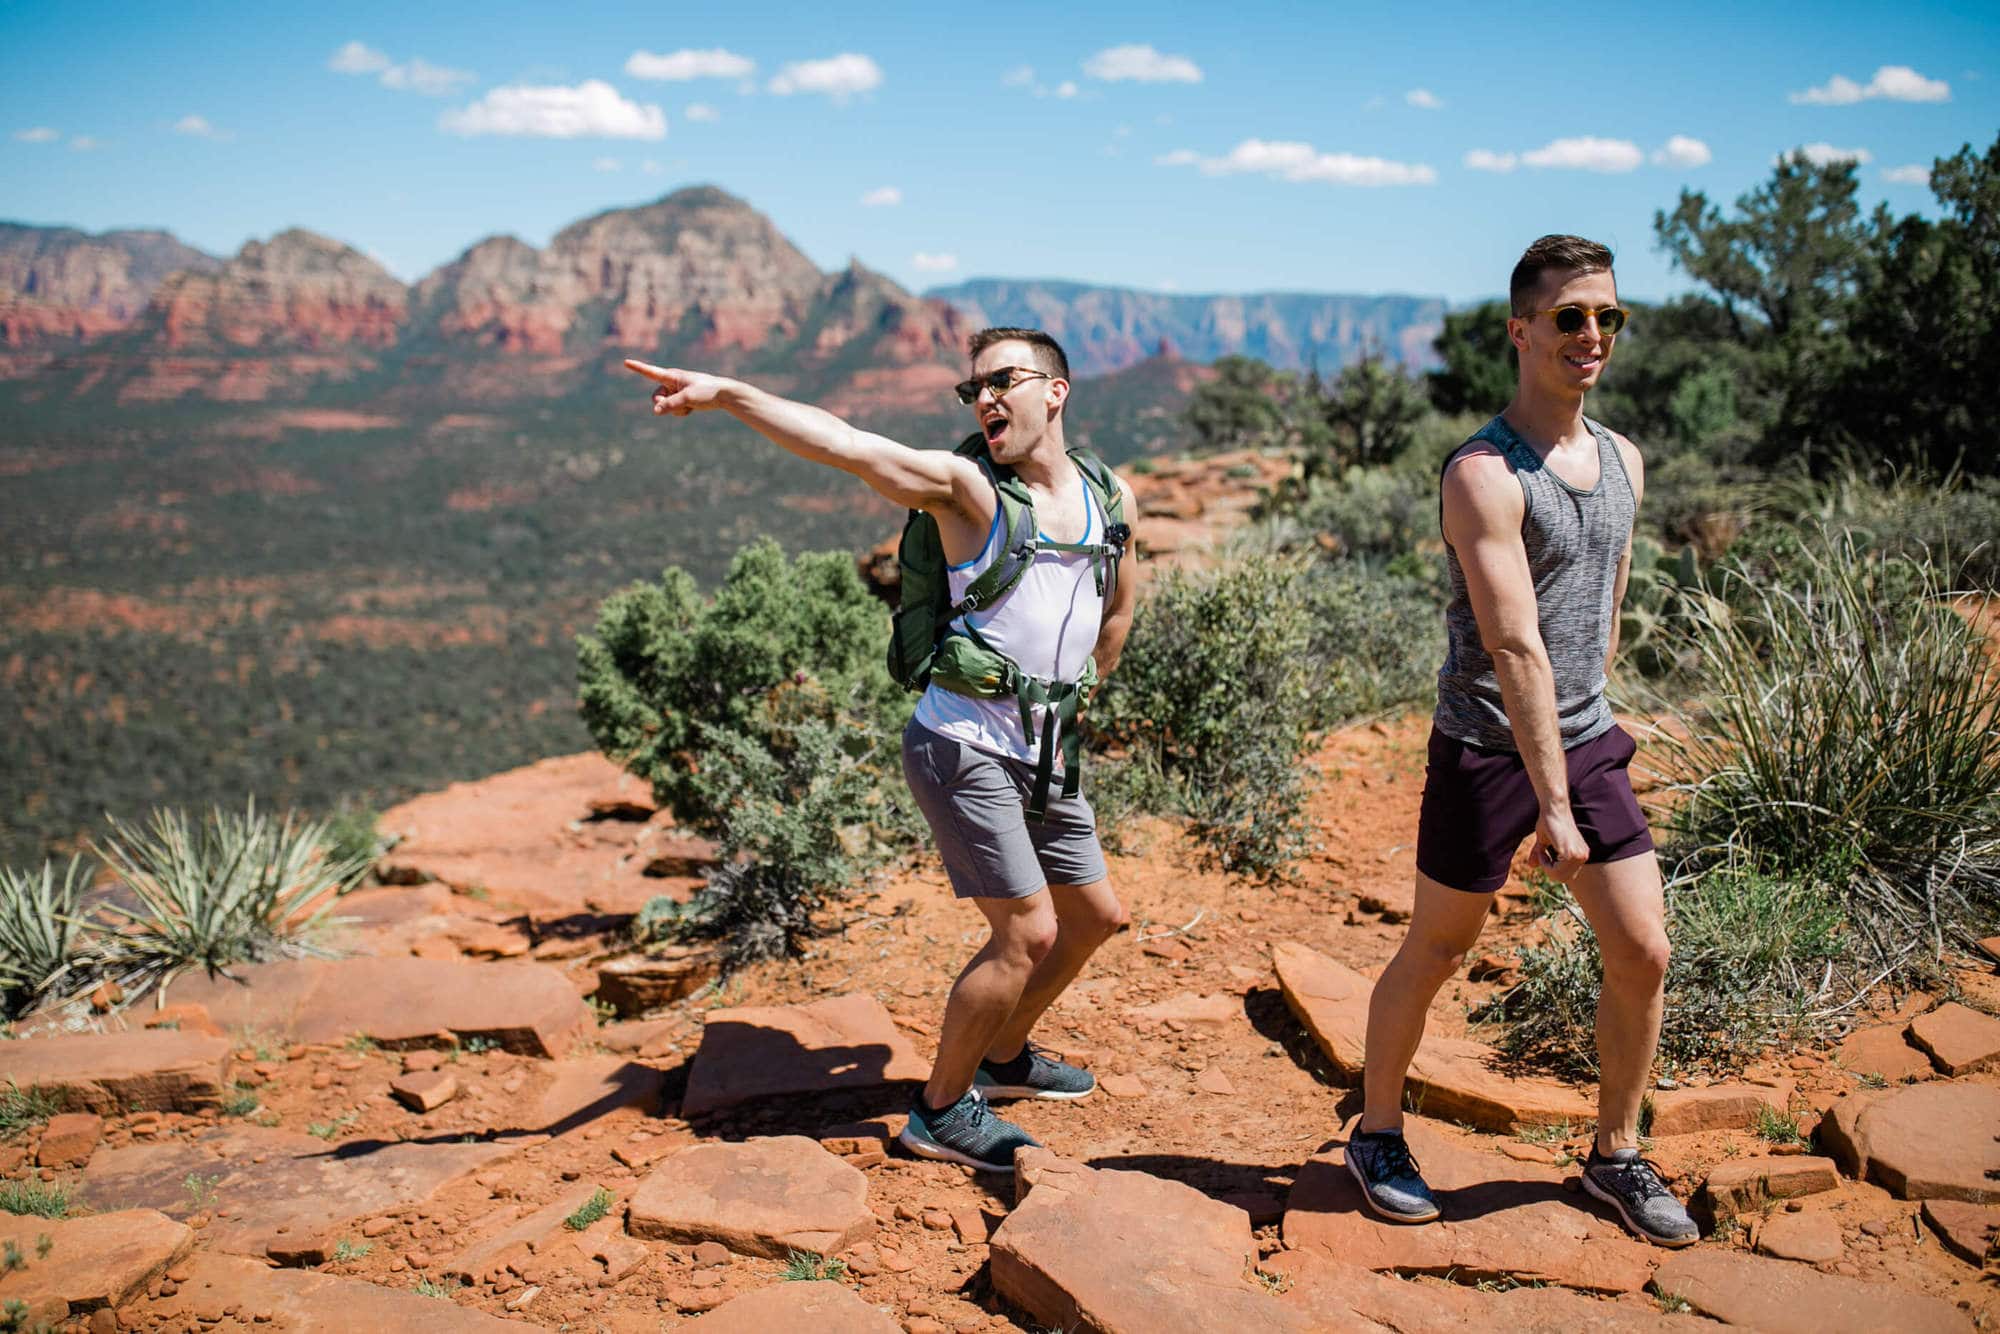 Michael and Todd visited from Chicago in April, which in the midwest is a month that feels like it should be gearing up towards summer but always somehow winds up more like winter. They requested epic views and fun hikes so, jamming as much into the experience we drove north to Sedona and then later to Page (check out next week’s blog for part II!). This is part I: Micheal and Todd’s Hiking Adventure in Sedona Arizona. So. I talk a lot about Peak Existence here at Aimee Flynn Photo. My mantra is, yes there will be epic photos but more than that you will have a fricken blast. And oh, boy, did we all have a blast. These two were up for absolutely everything and had a time and half doing it all, whether we were driving to our hiking spots and belting out show tunes, butt-scooting down a VERY steep trail, or snorting into a very protein forward lasagna. Michael and Todd were pretty unfamiliar with the desert landscape, which I took as a sort of personal challenge to blow their minds as much as possible and it was SO FUN watching them experience my favorite places with fresh eyes. We started the day off with one of my favorite hikes (which I took a very photojournalism approach too- this was Michael and Todd’s first introduction to Sedona so my goal was just to capture their authentic wonder and fun at the crazy new landscape). Antics ensued, which honestly turned into a theme of the trip.